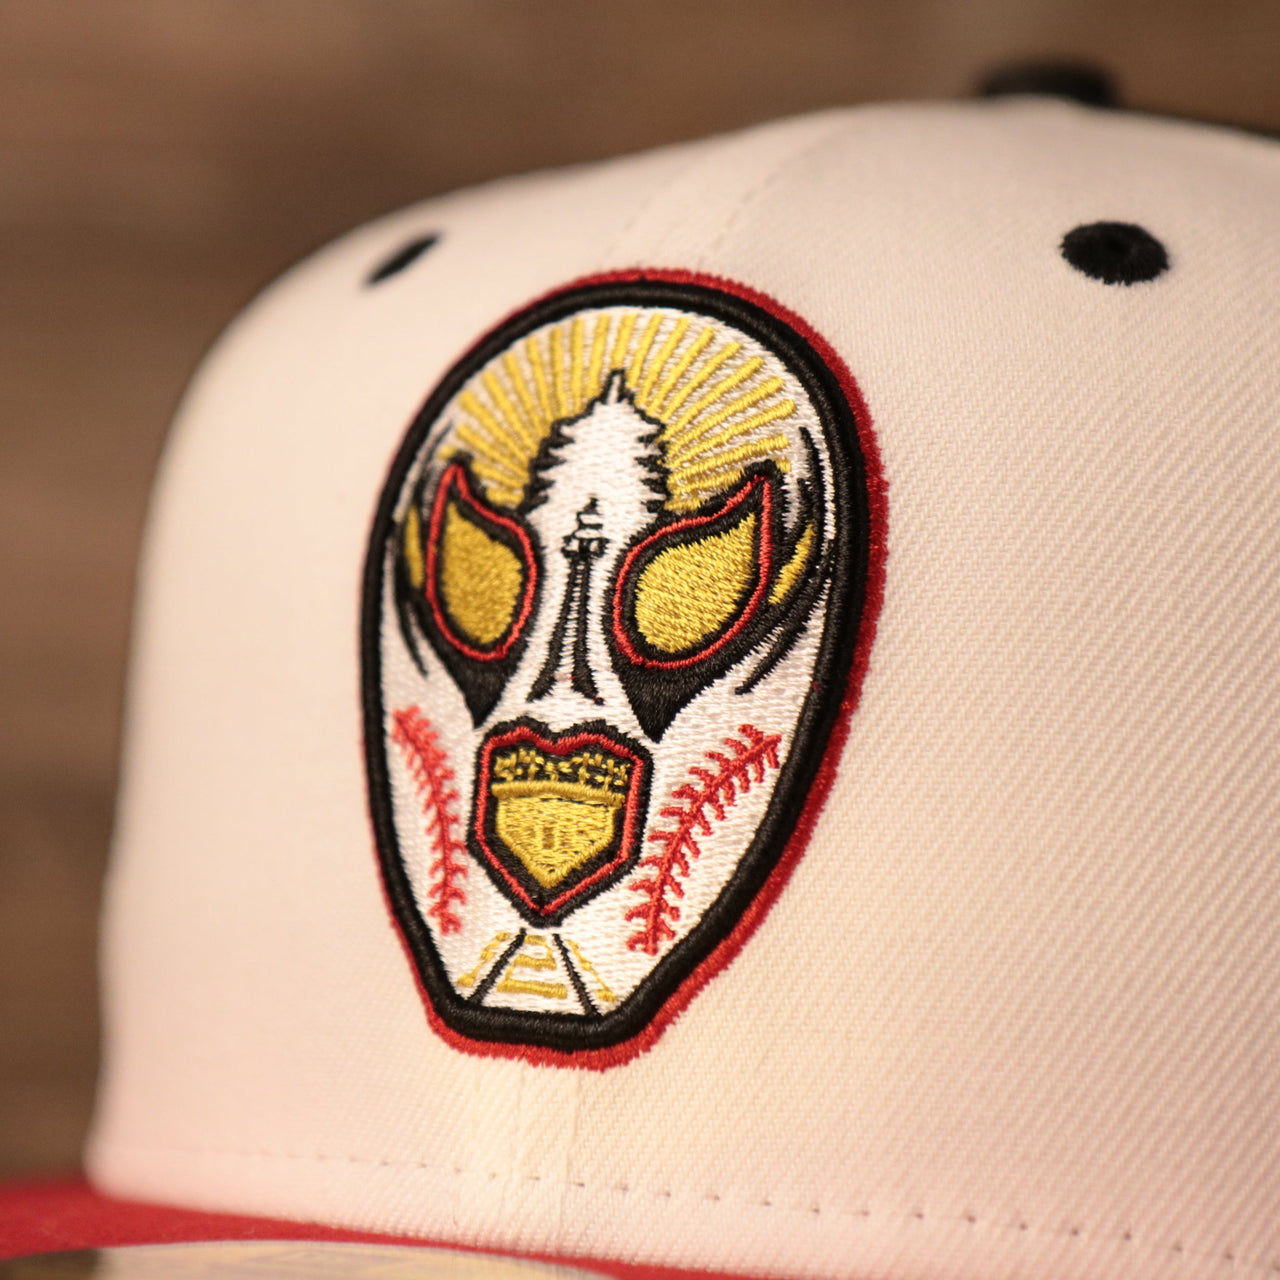 A logo of the luchadores de reading on the front of the luchadores fitted cap by New Era.